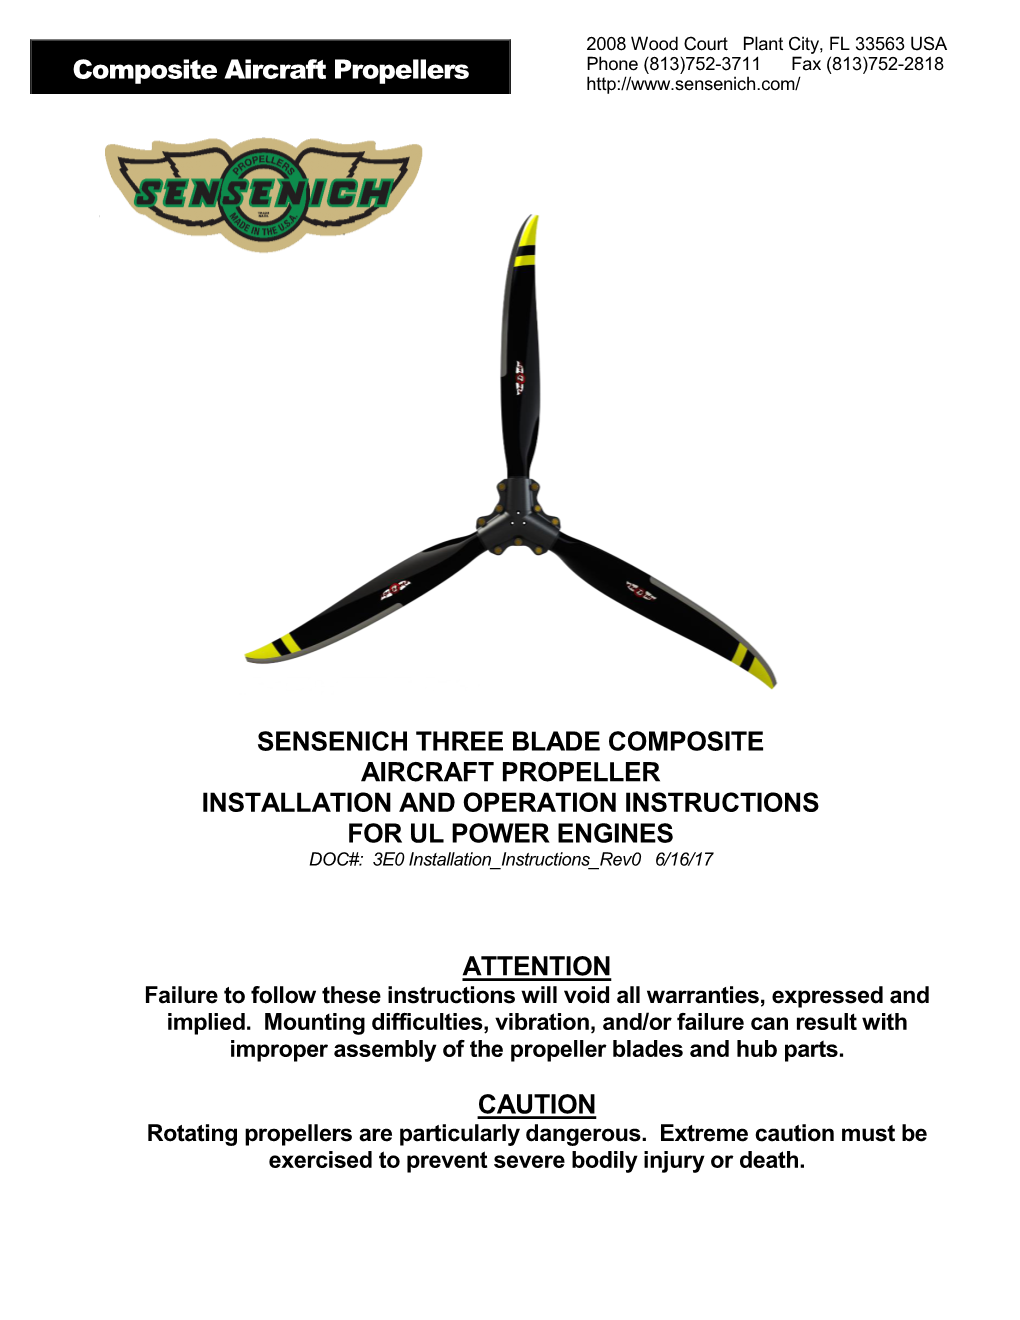 SENSENICH THREE BLADE COMPOSITE AIRCRAFT PROPELLER INSTALLATION and OPERATION INSTRUCTIONS for UL POWER ENGINES DOC#: 3E0 Installation Instructions Rev0 6/16/17